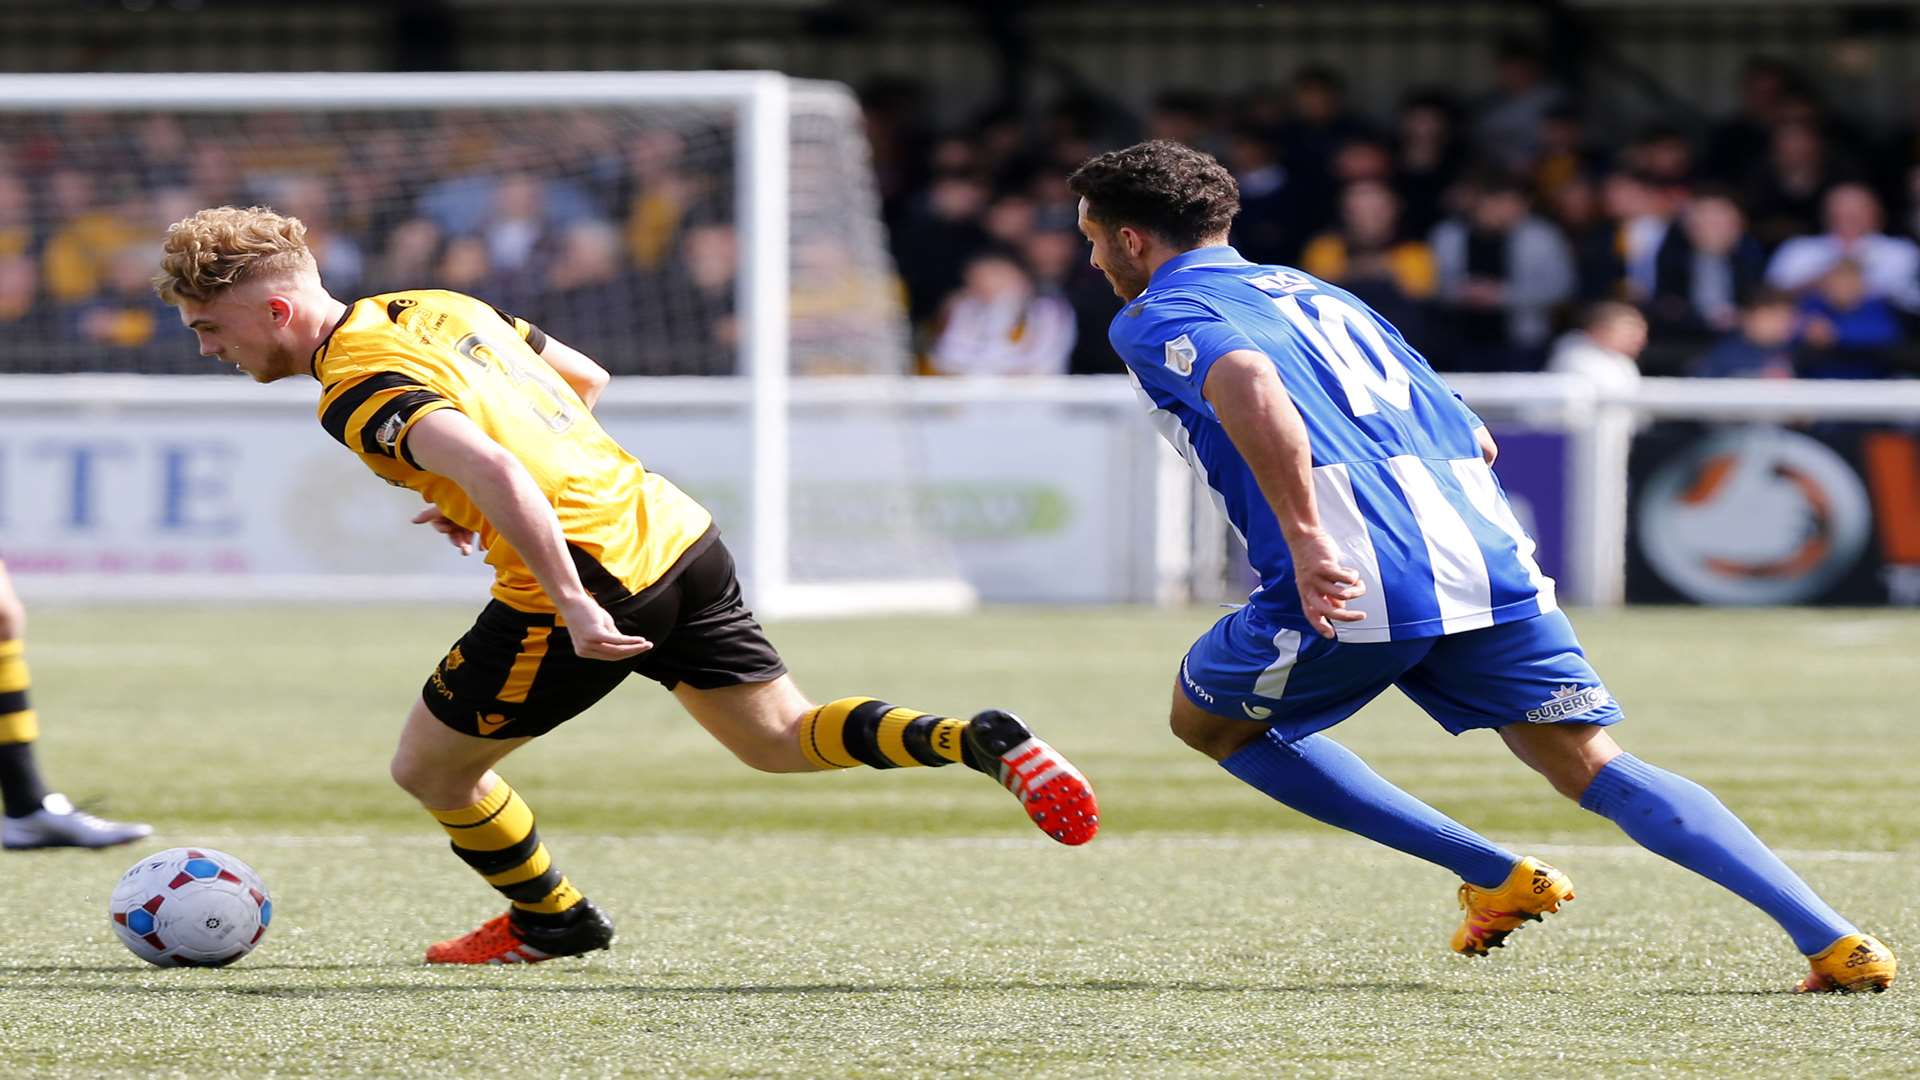 Bobby-Joe Taylor on the ball for Maidstone United Picture: Andy Jones